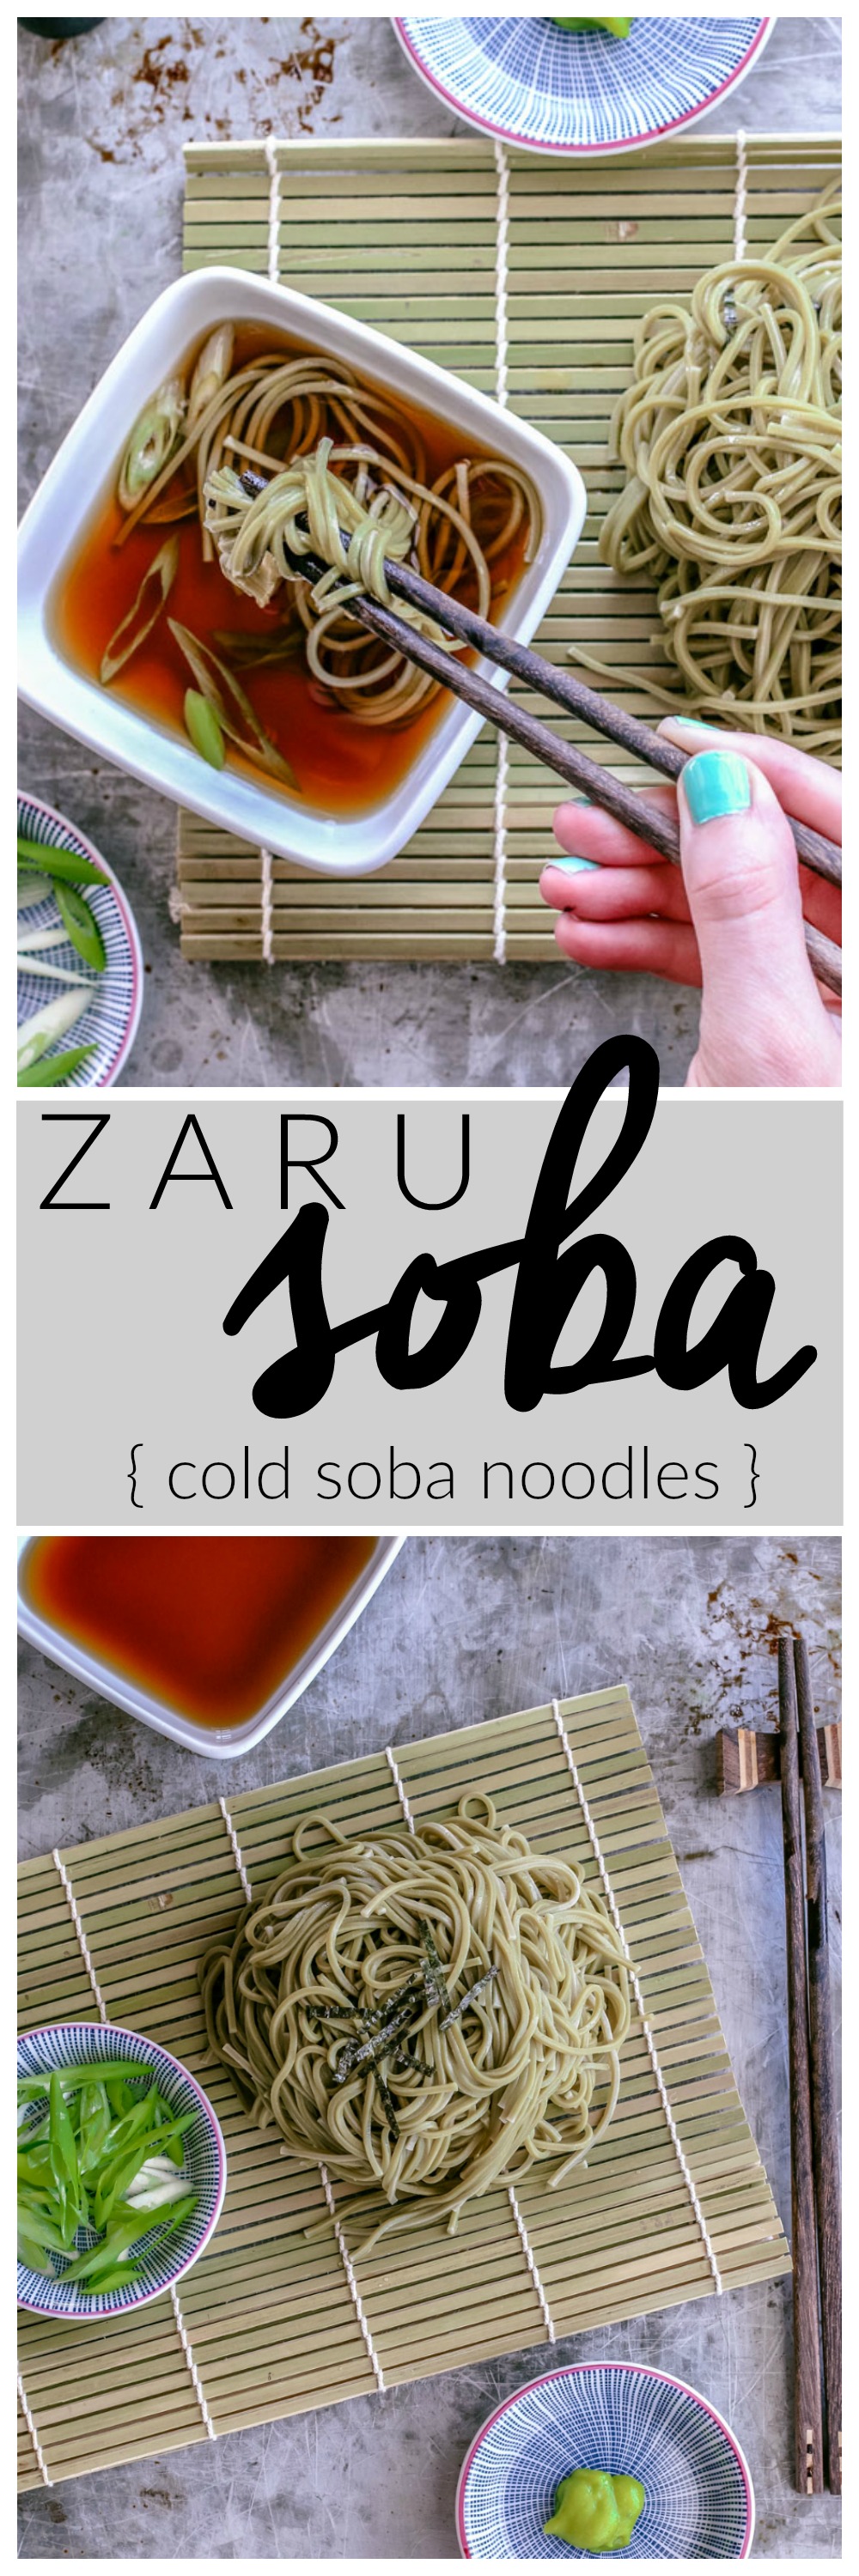 Zaru Soba { cold soba noodles } | Killing Thyme — This cool and simple Japanese dish is the perfect meal for those summer scorchers. Fill your belly and cool down at the same time with this slurp-worthy dish!